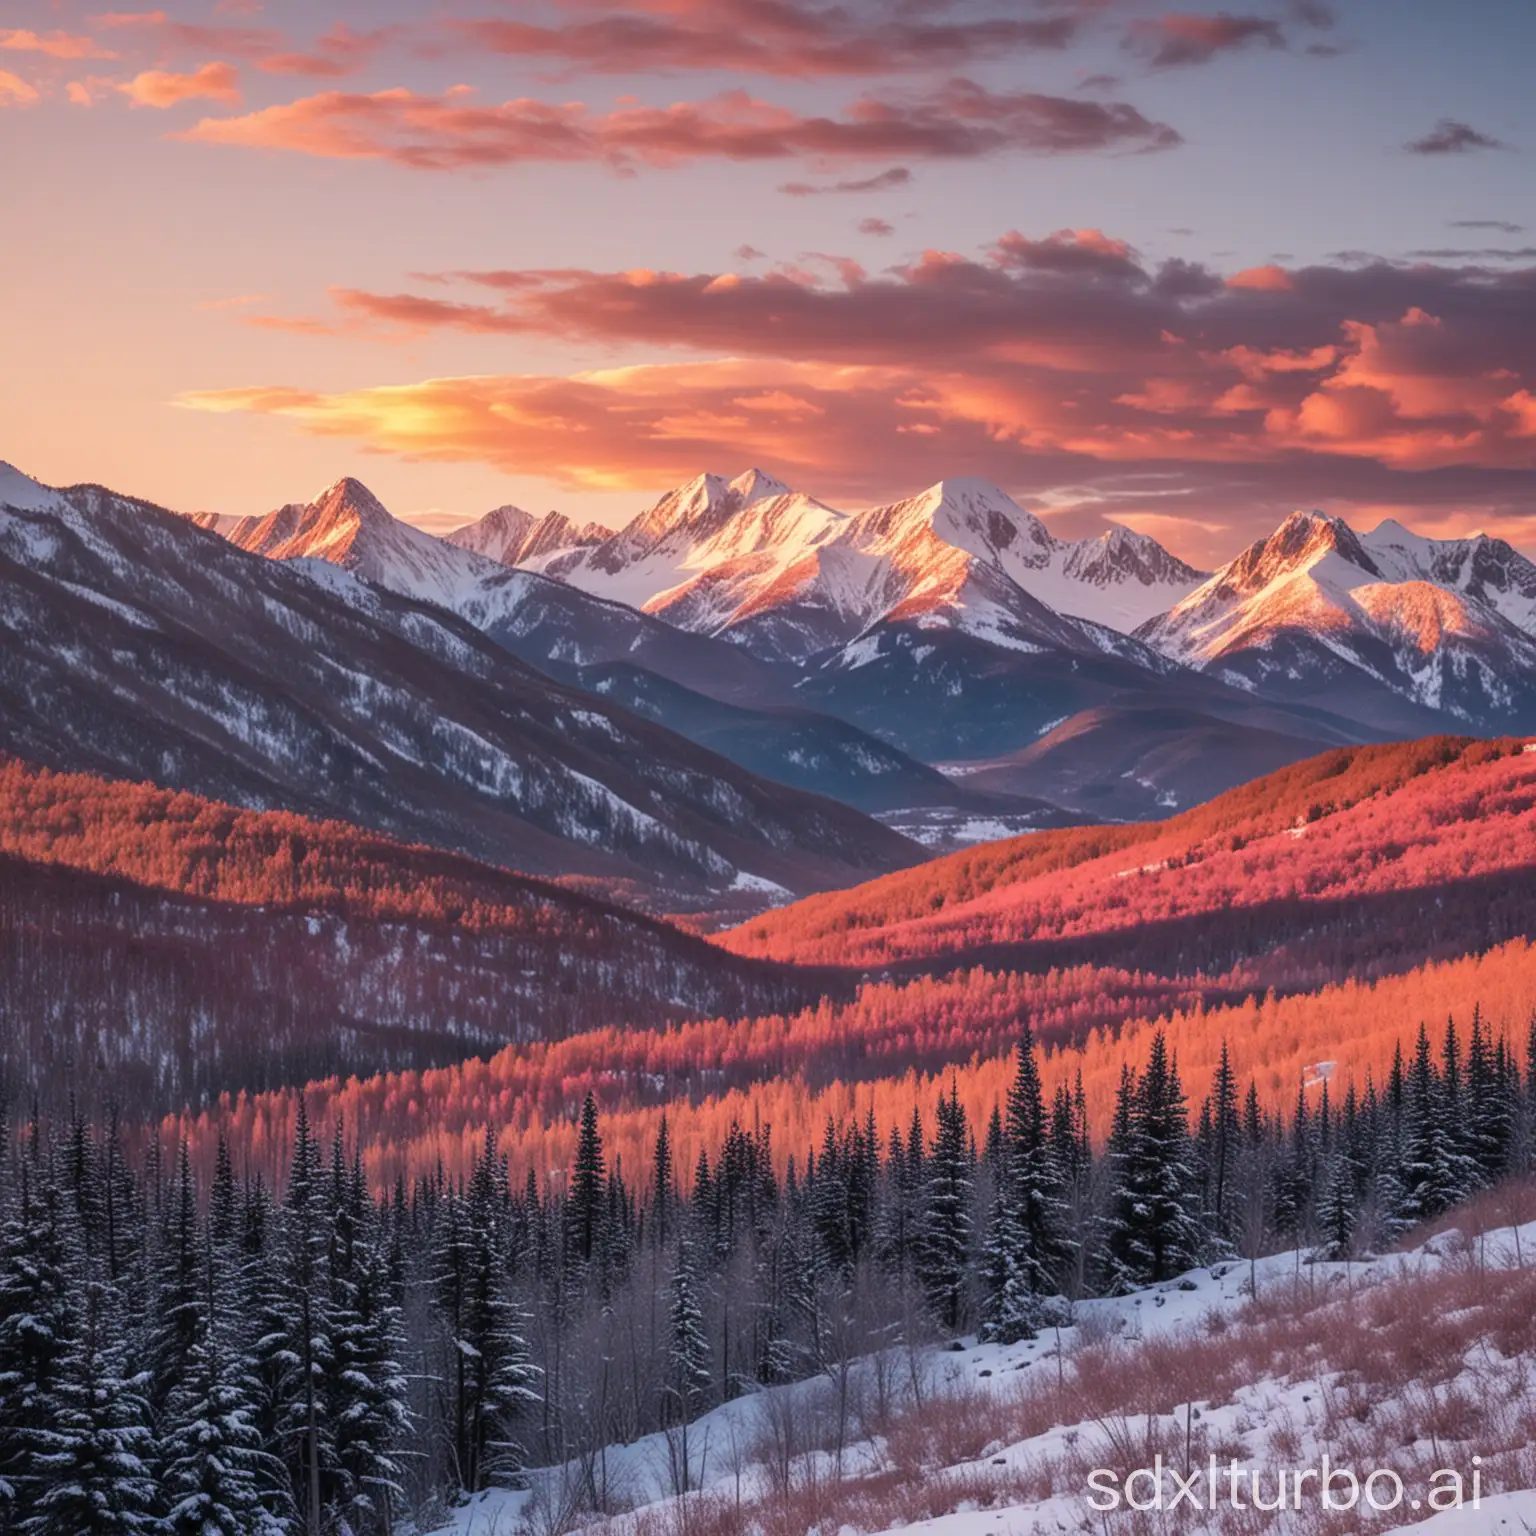 A breathtaking sunset over a mountain range. The sun is setting behind the peaks of the mountains, casting a warm glow on the landscape. The sky is a deep blue, and the clouds are a mix of white and pink. The mountains are covered in snow, and the trees are bare. The image is peaceful and serene, and it conveys a sense of adventure and exploration.